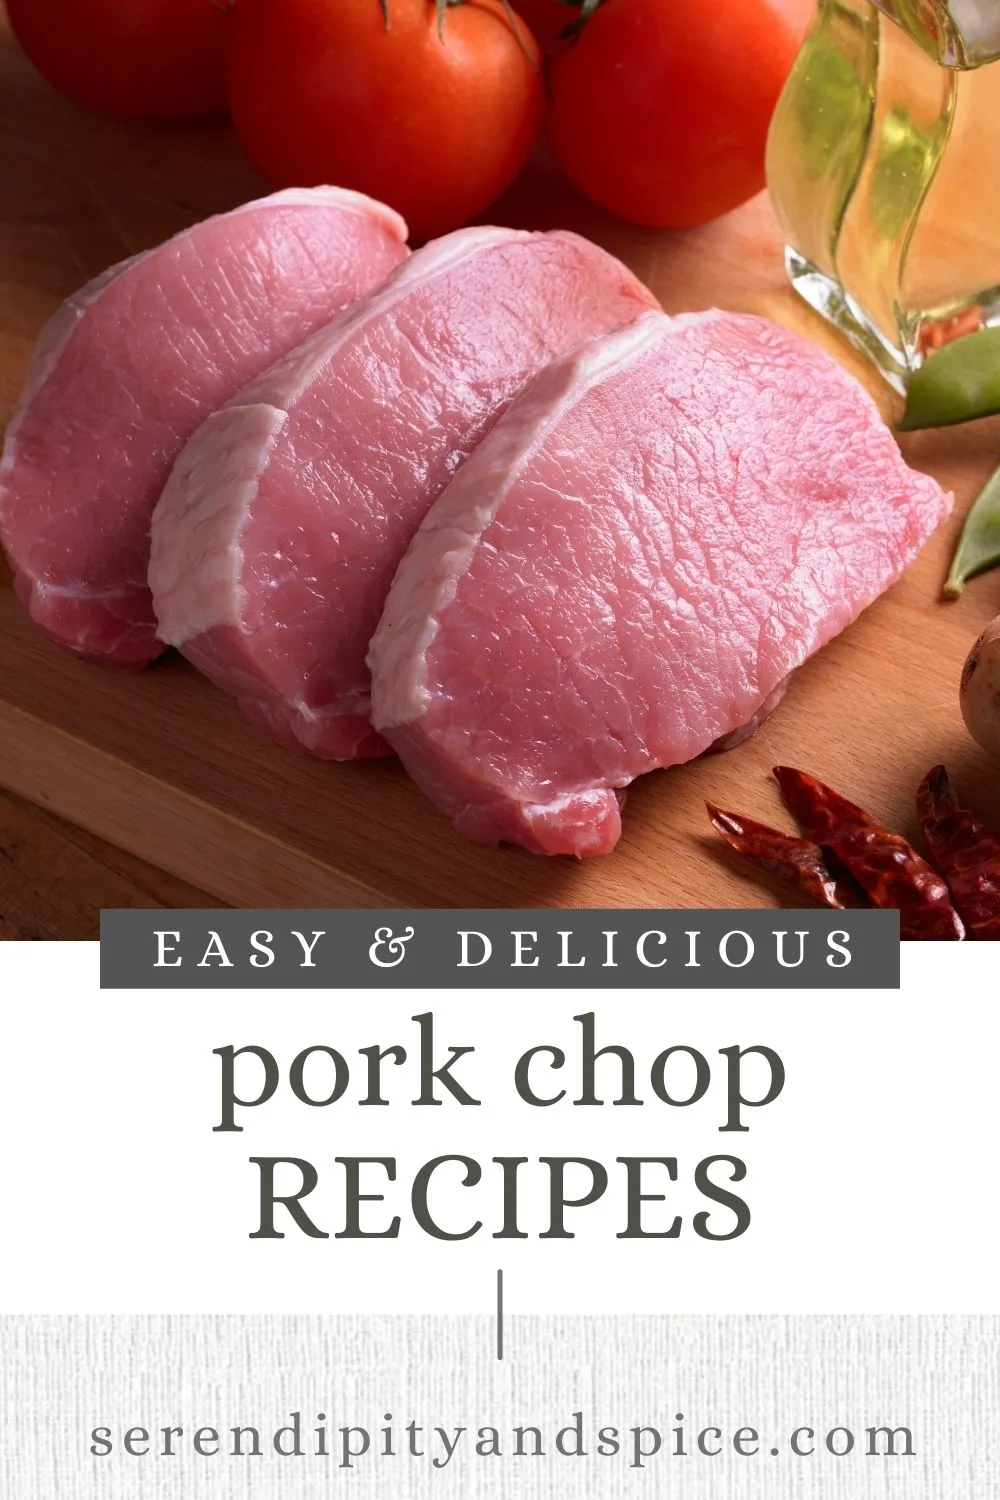 Delicious and Easy Pork Chop Recipes the whole family will love for dinner!